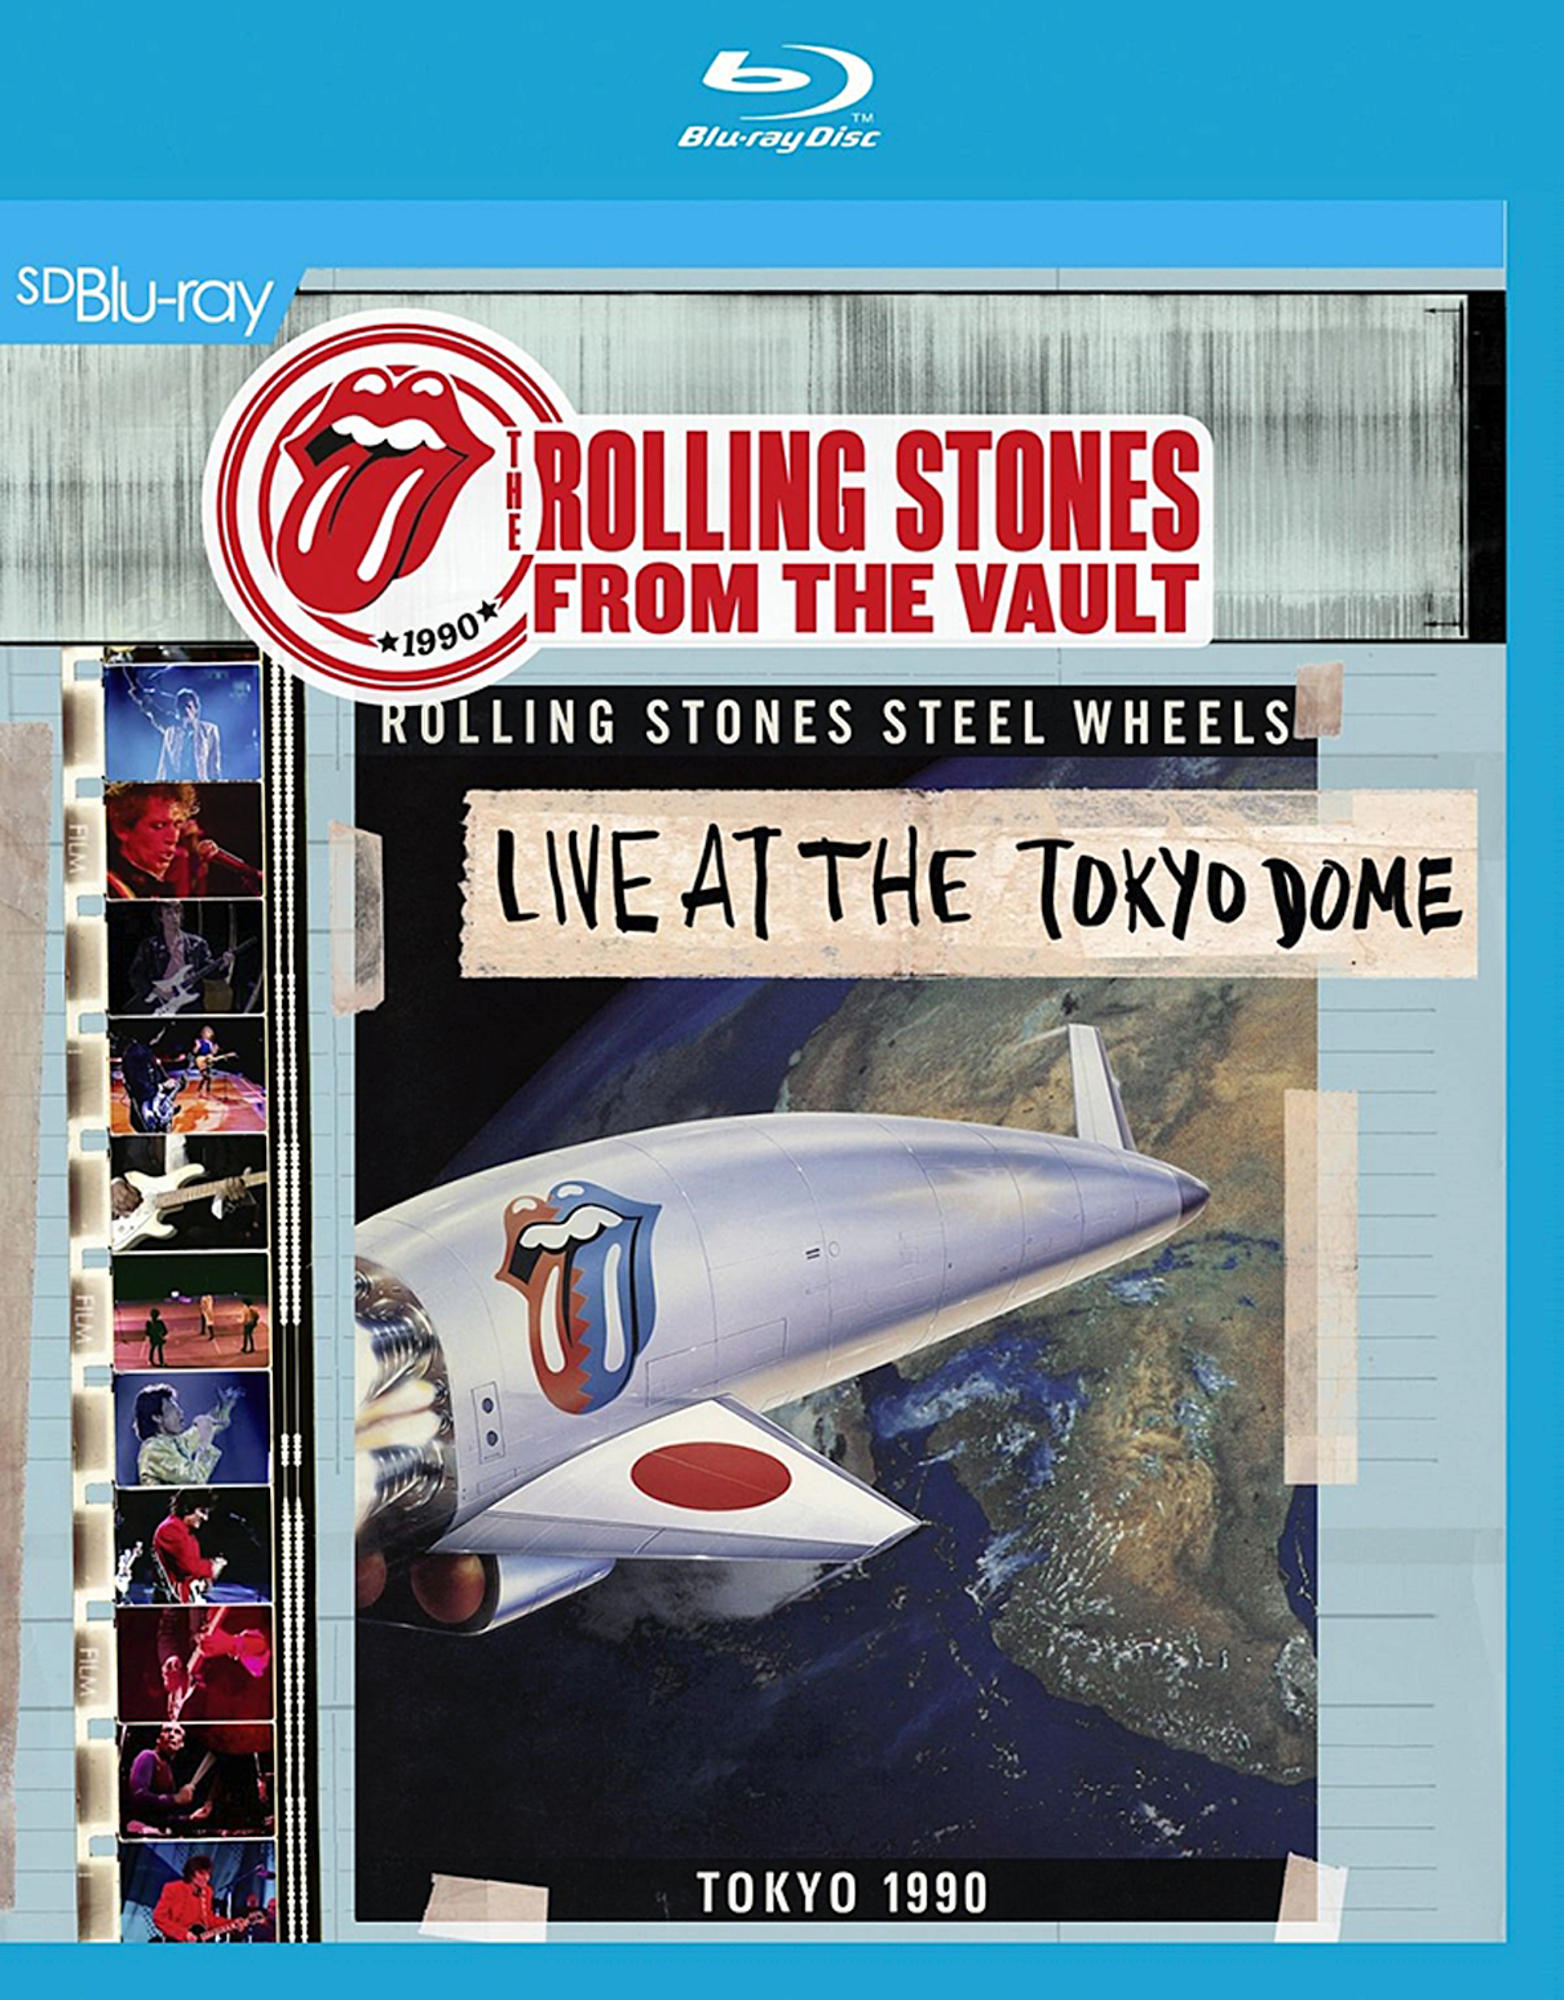 The Tokyo From Dome At Vault-Live (Blu-ray) - The - 1990 Stones The Rolling